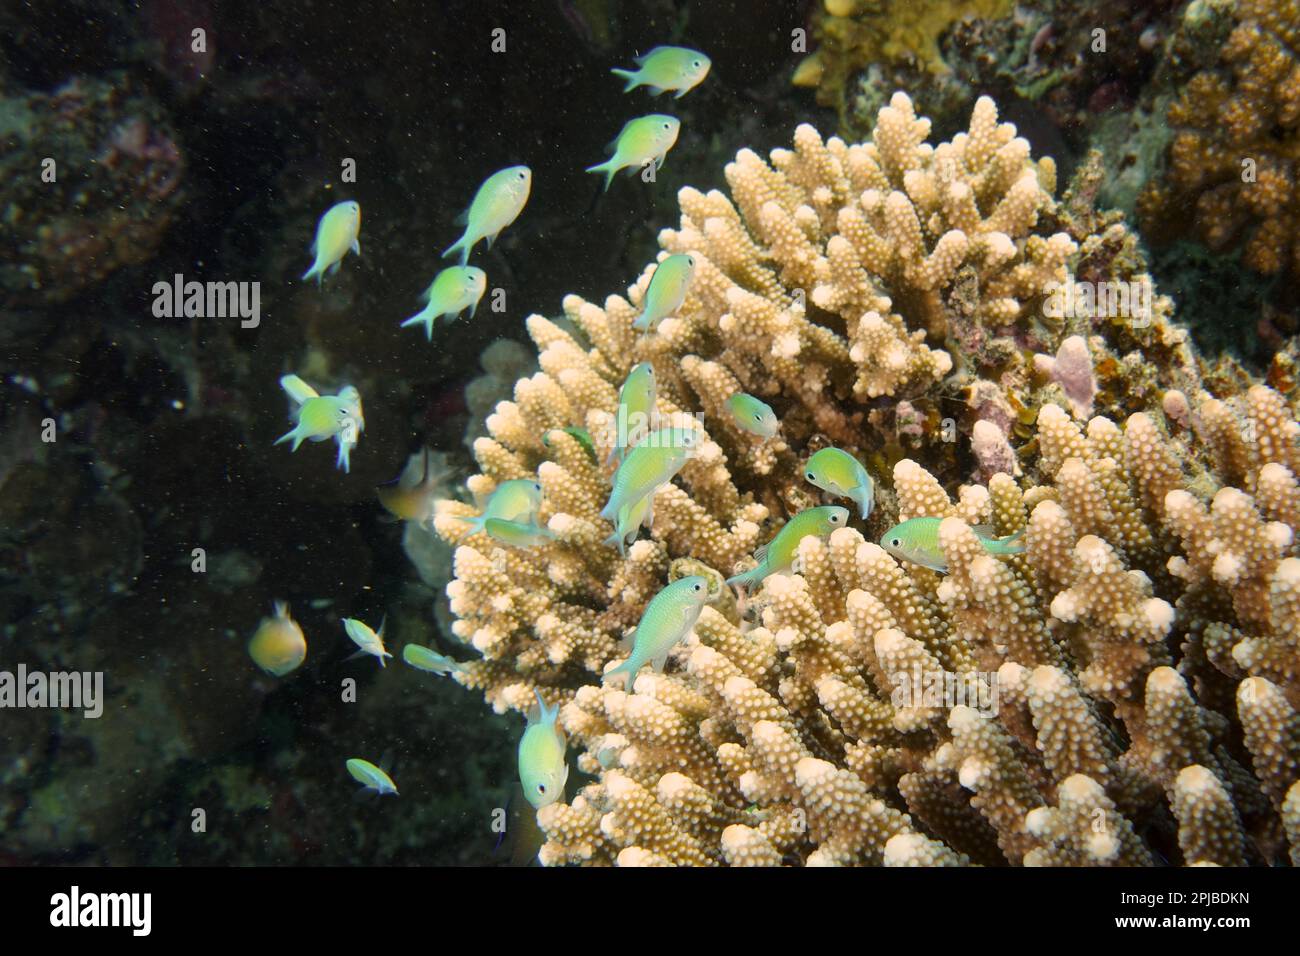 A group of Green Swallowtail (Chromis viridis) seeks shelter in a stony coral, Staghorn Coral (Acropora humilis), Dive Site House Reef, Mangrove Bay Stock Photo